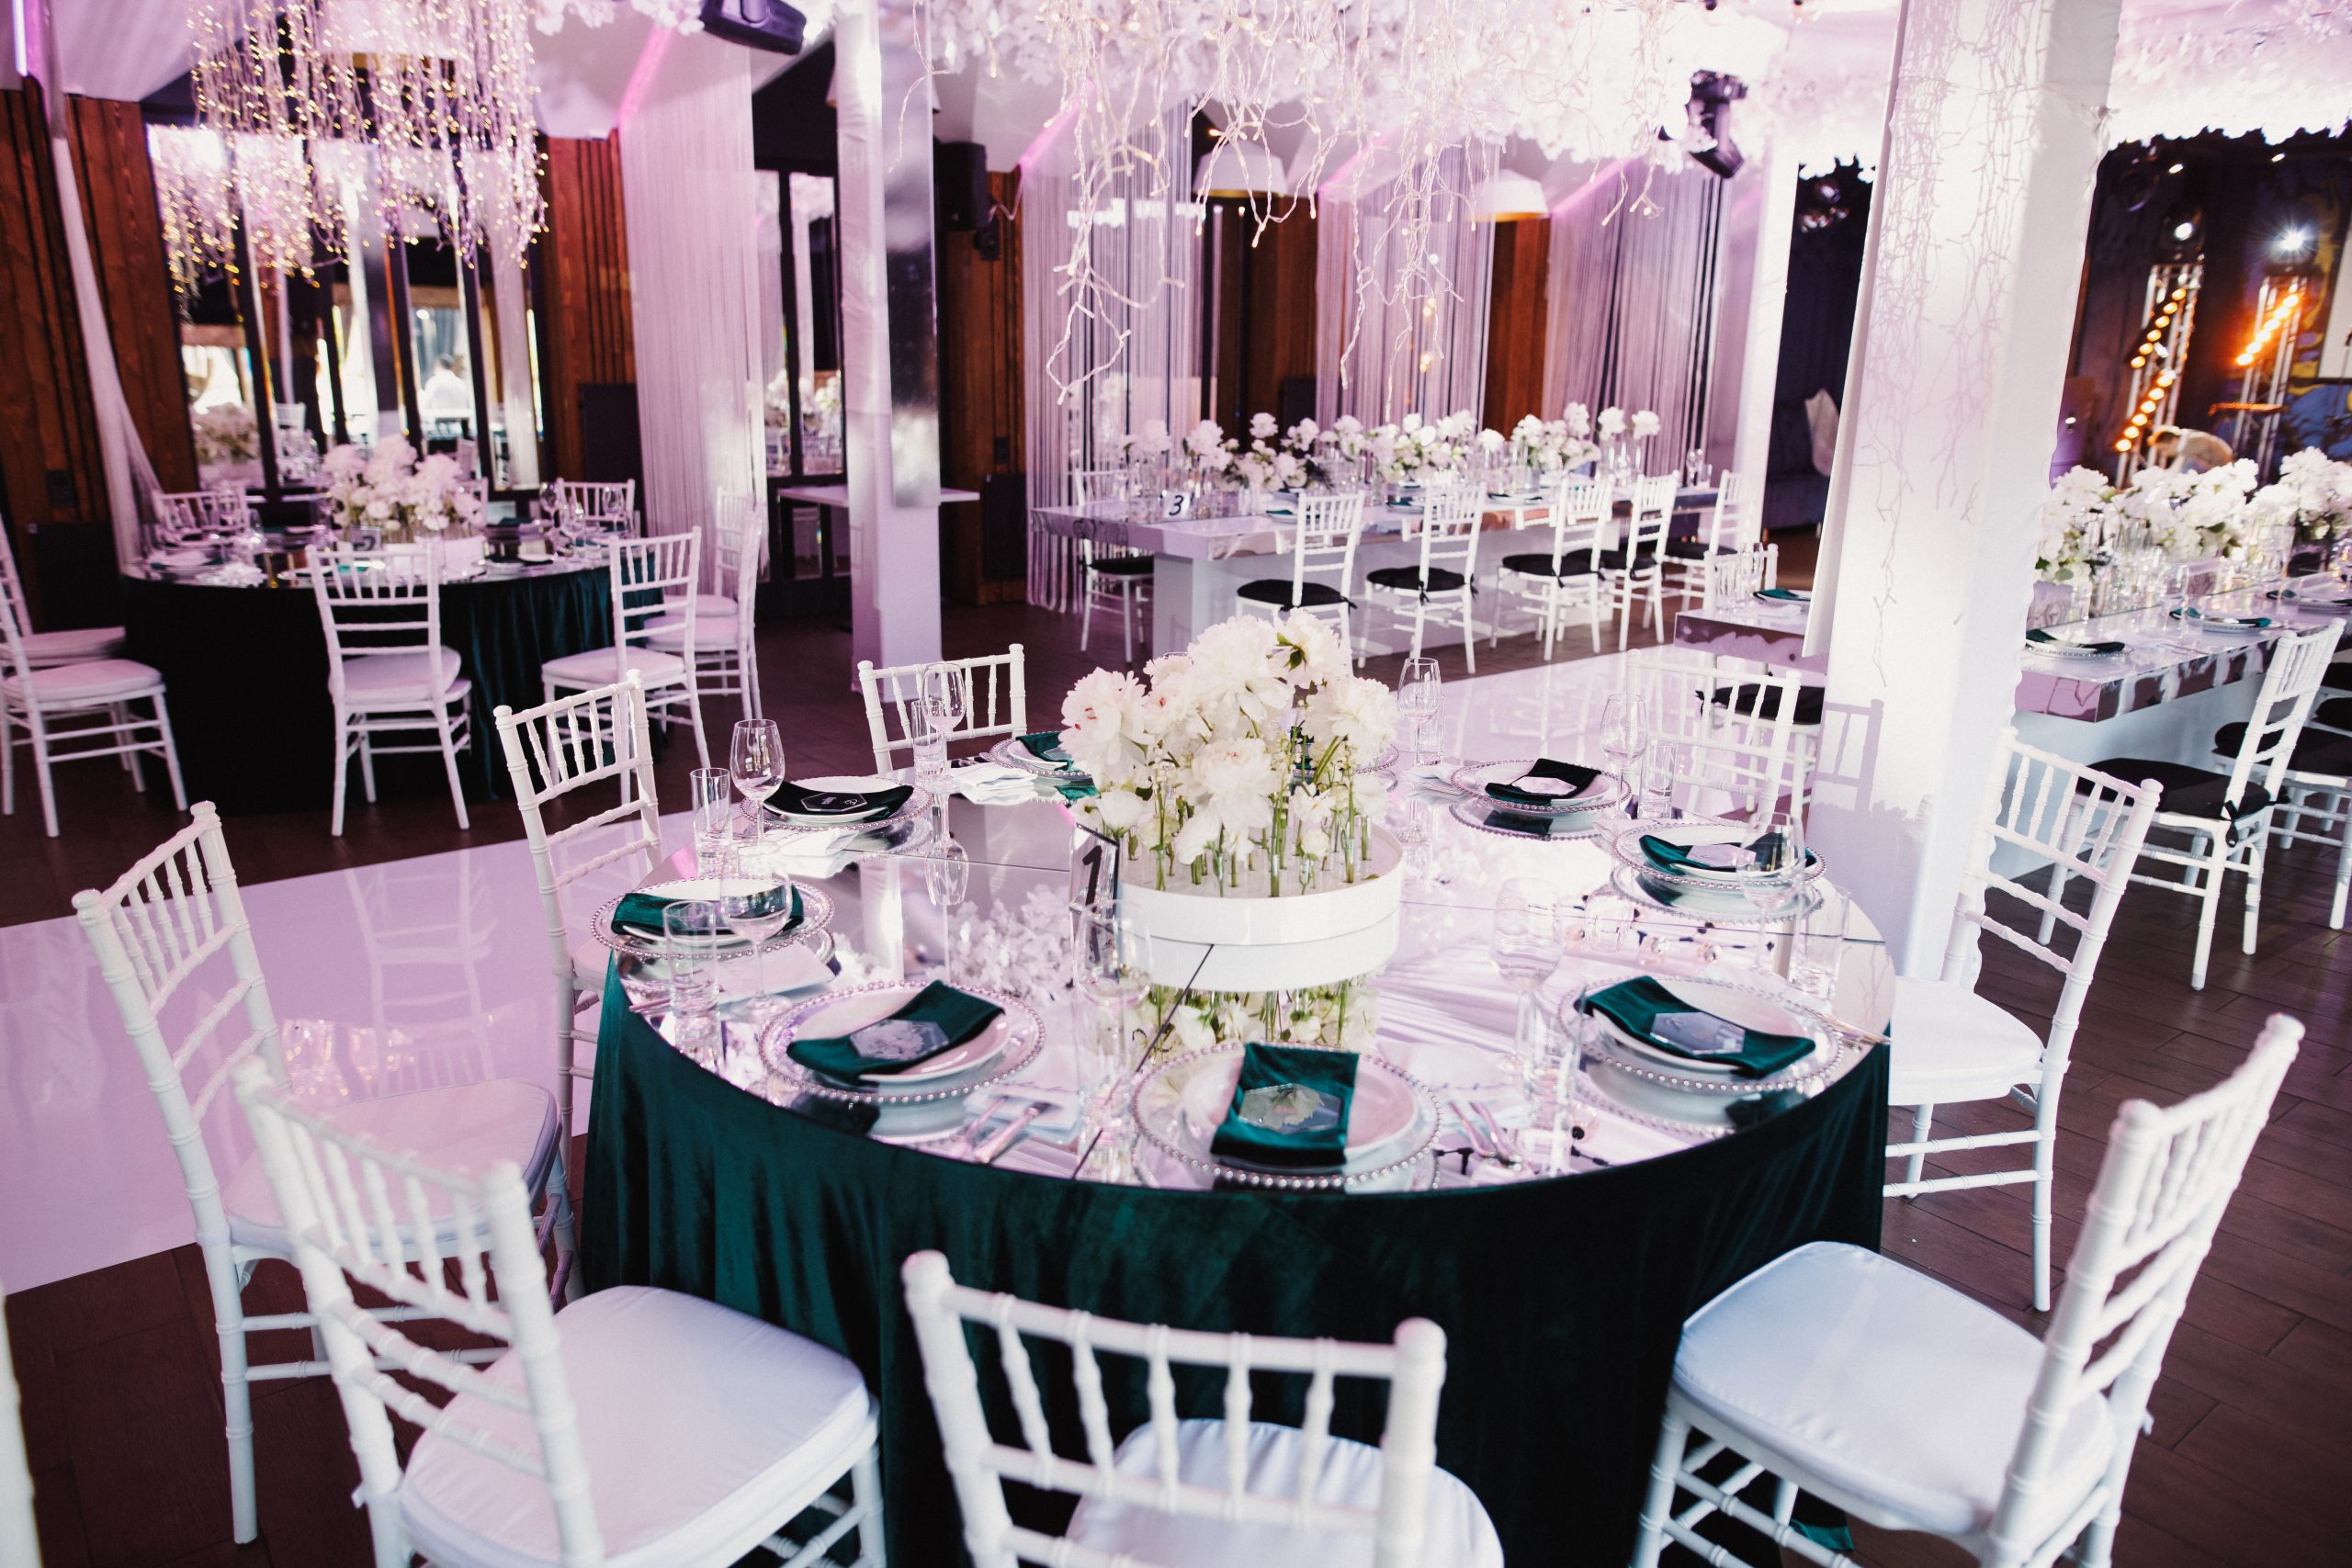 What Professional Wedding Caterers Can Do for You